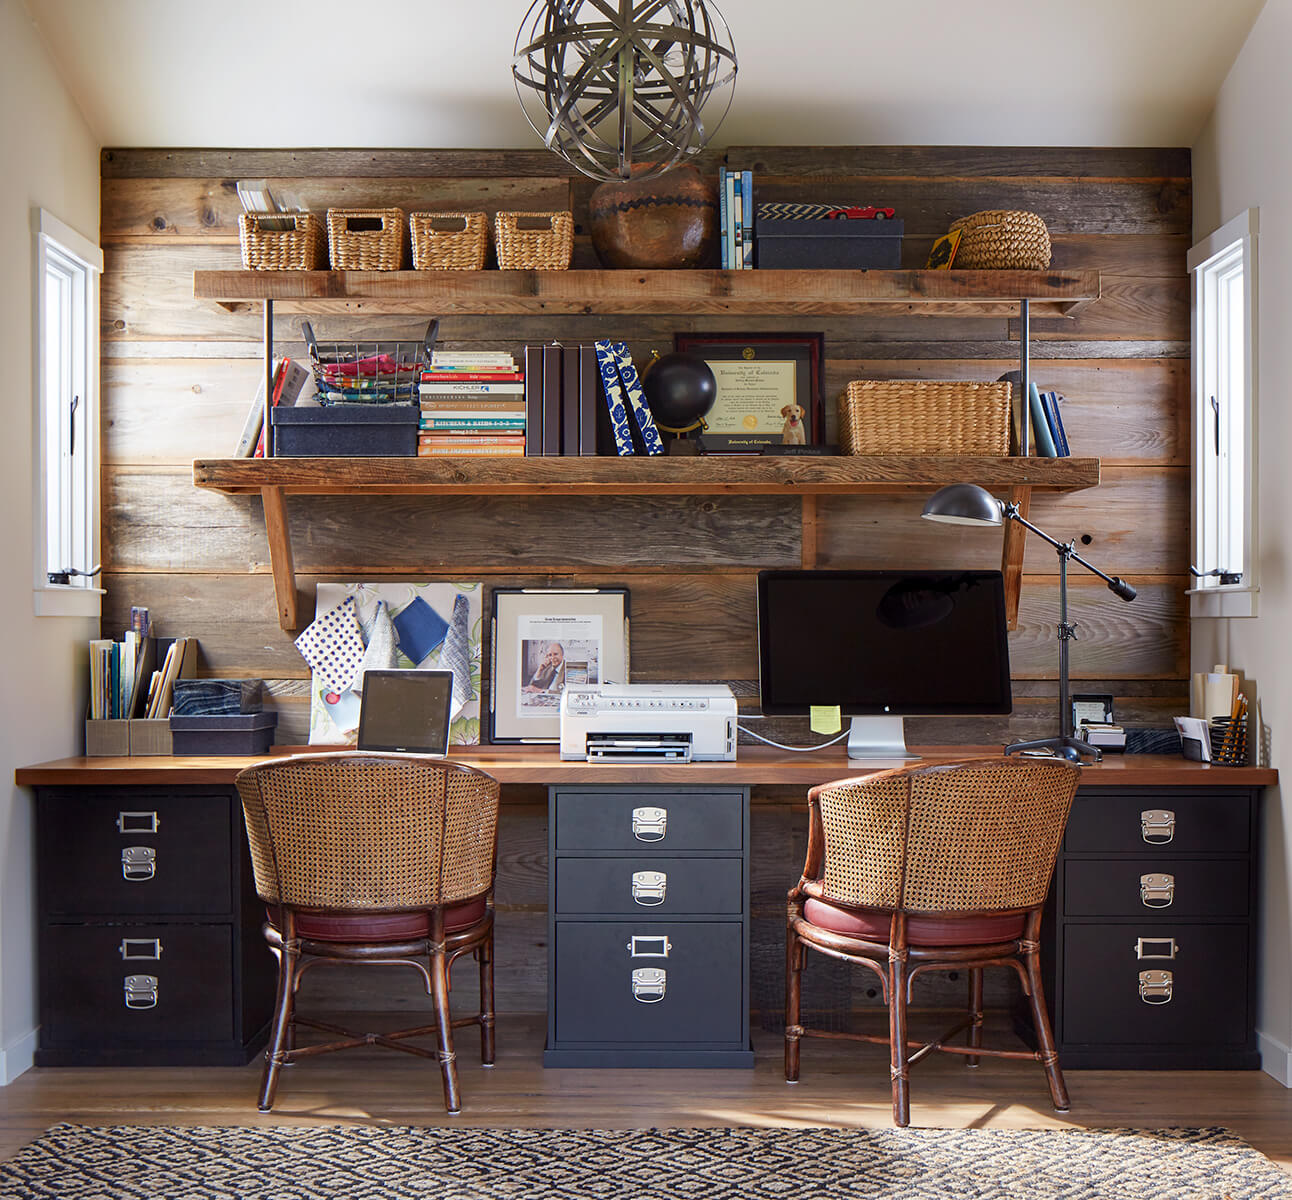 12 Ideas to Furnish and Decorate an Office With a Rustic Touch (1)